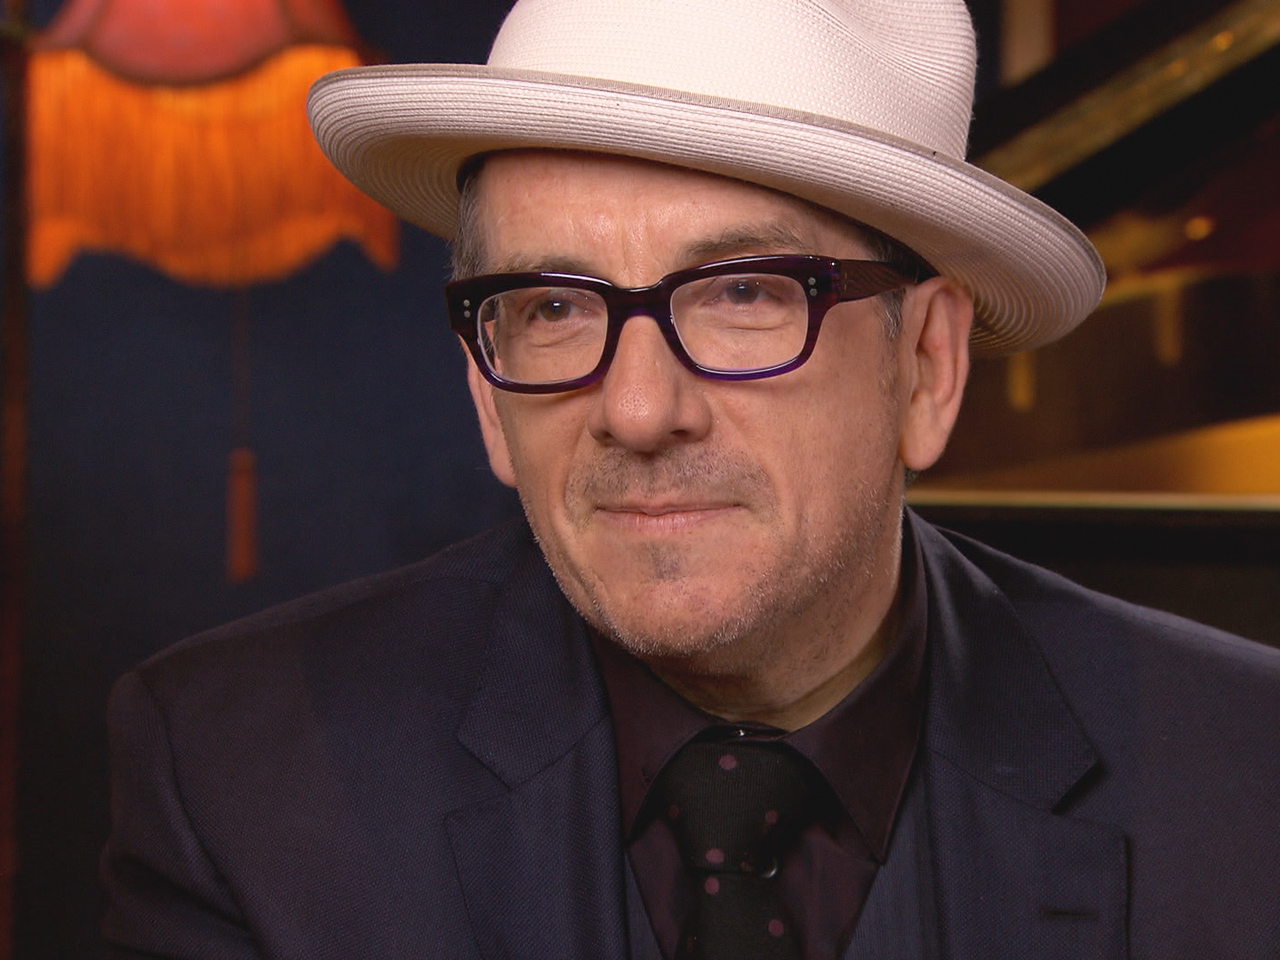 Elvis Costello reveals he had surgery for "aggressive ...
